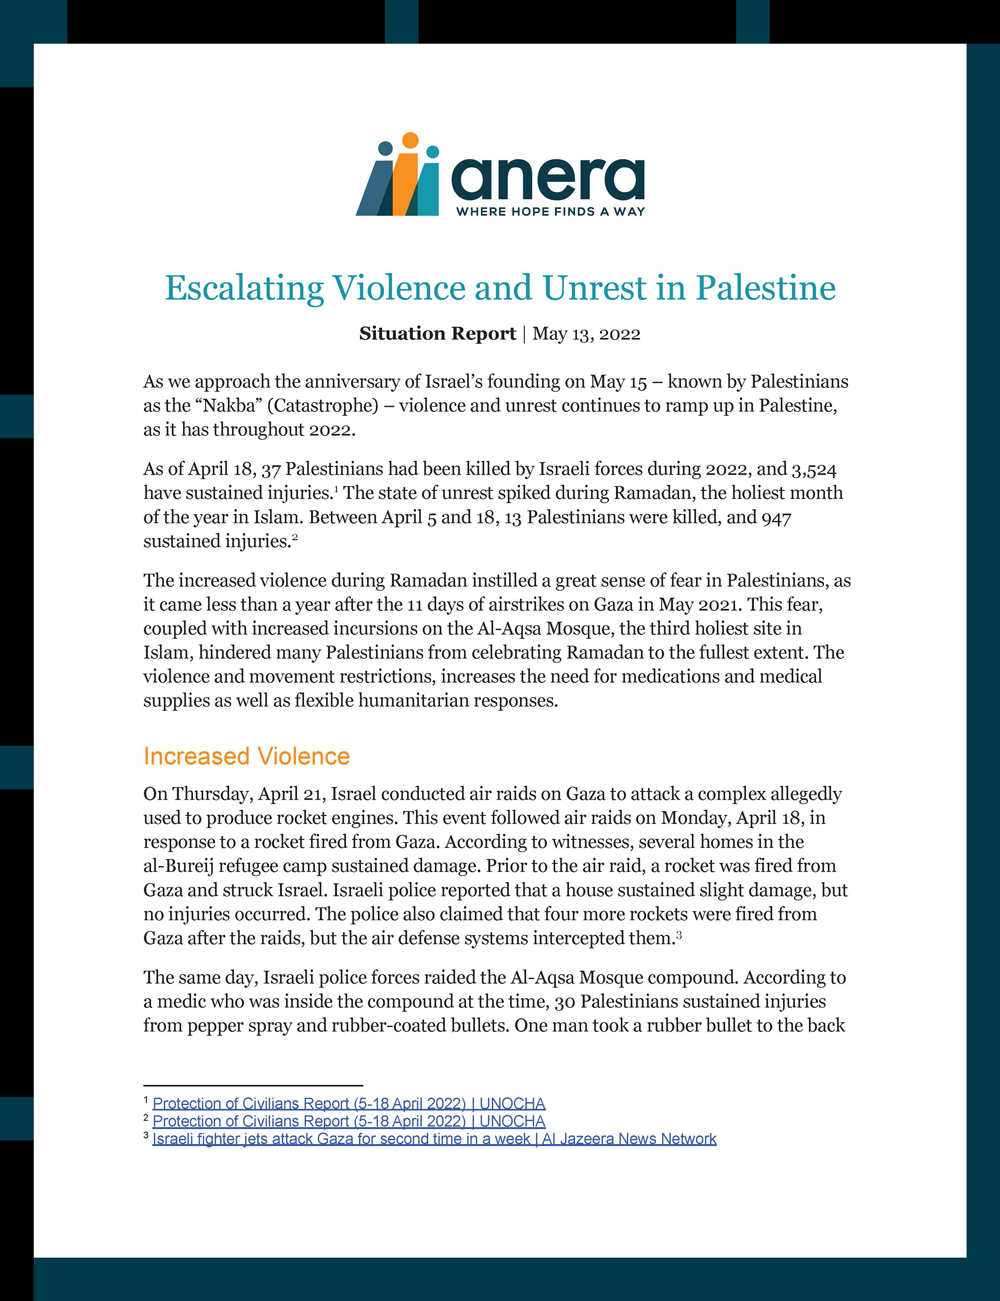 Page 1 of Anera's Situation Report on Escalating Violence in Palestine